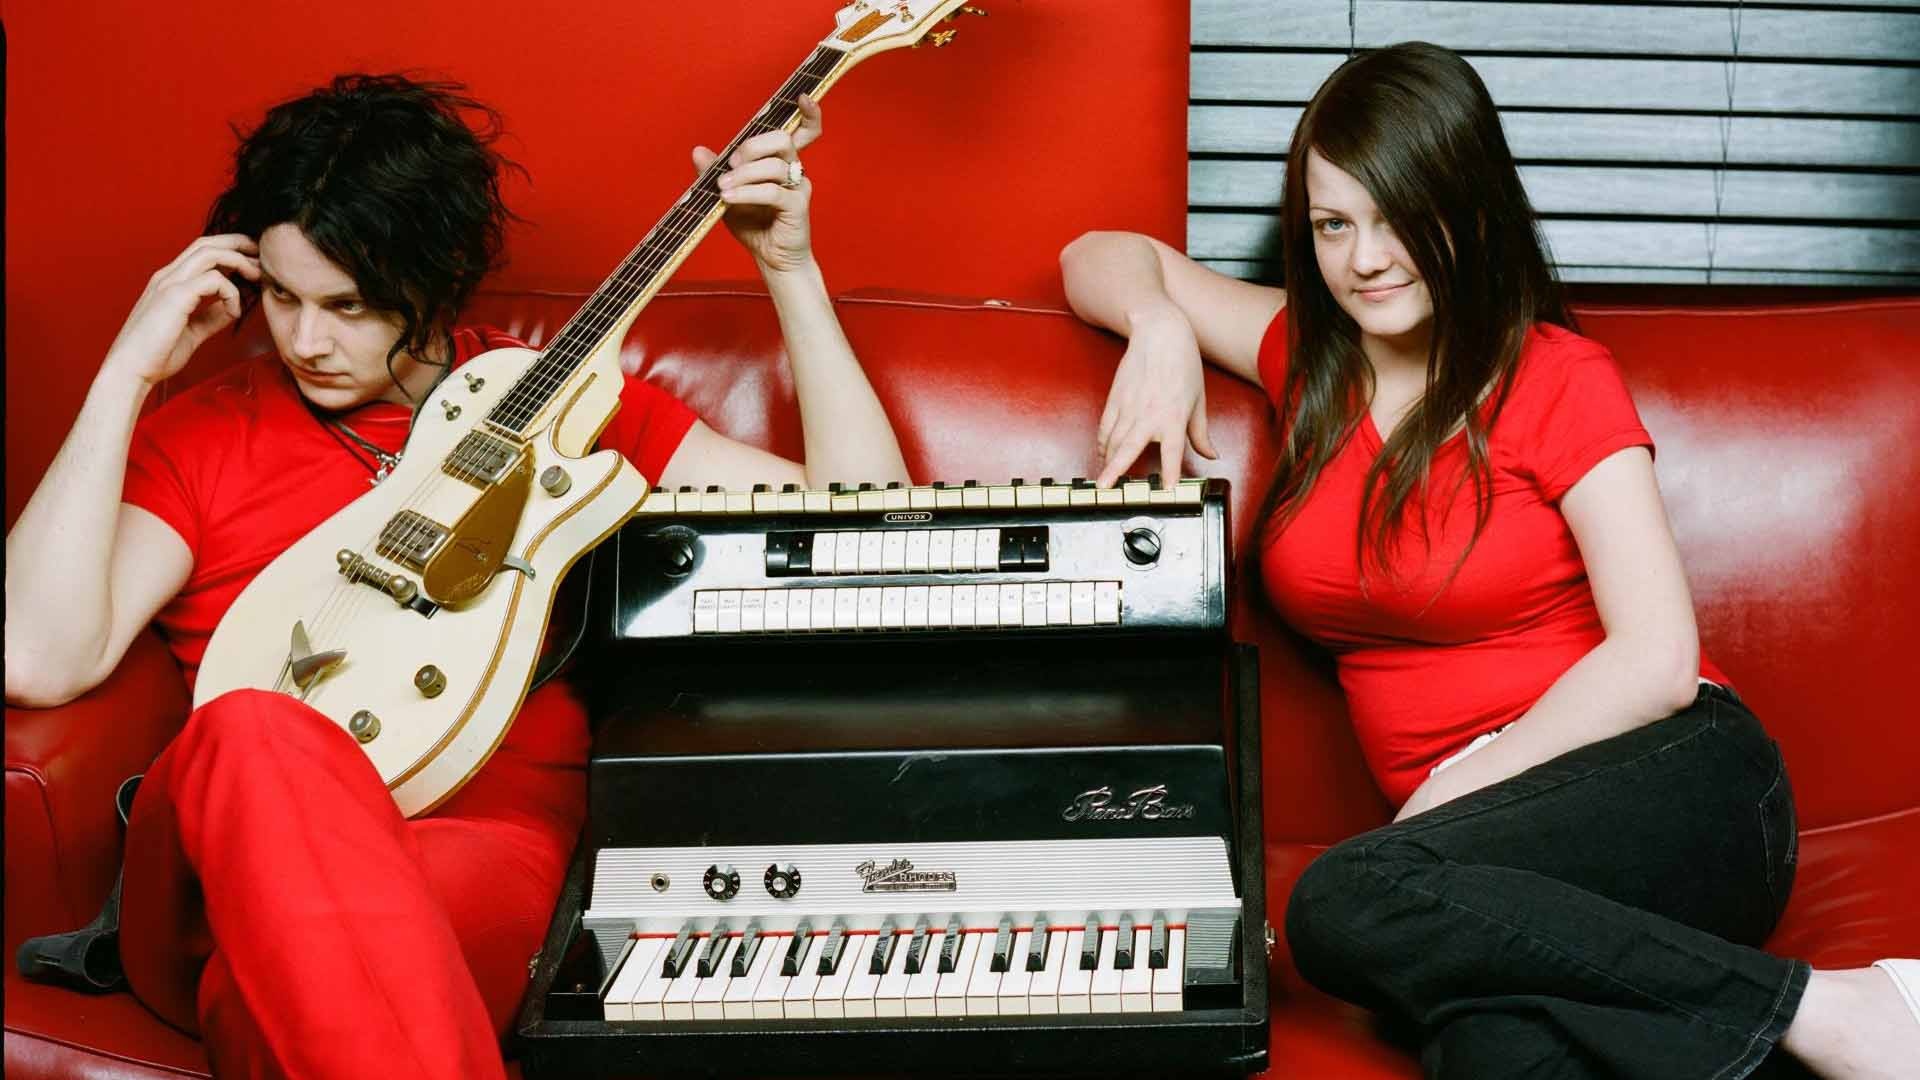 The White Stripes, Jack White's auction, Iconic instruments, Garage of Rock, 1920x1080 Full HD Desktop